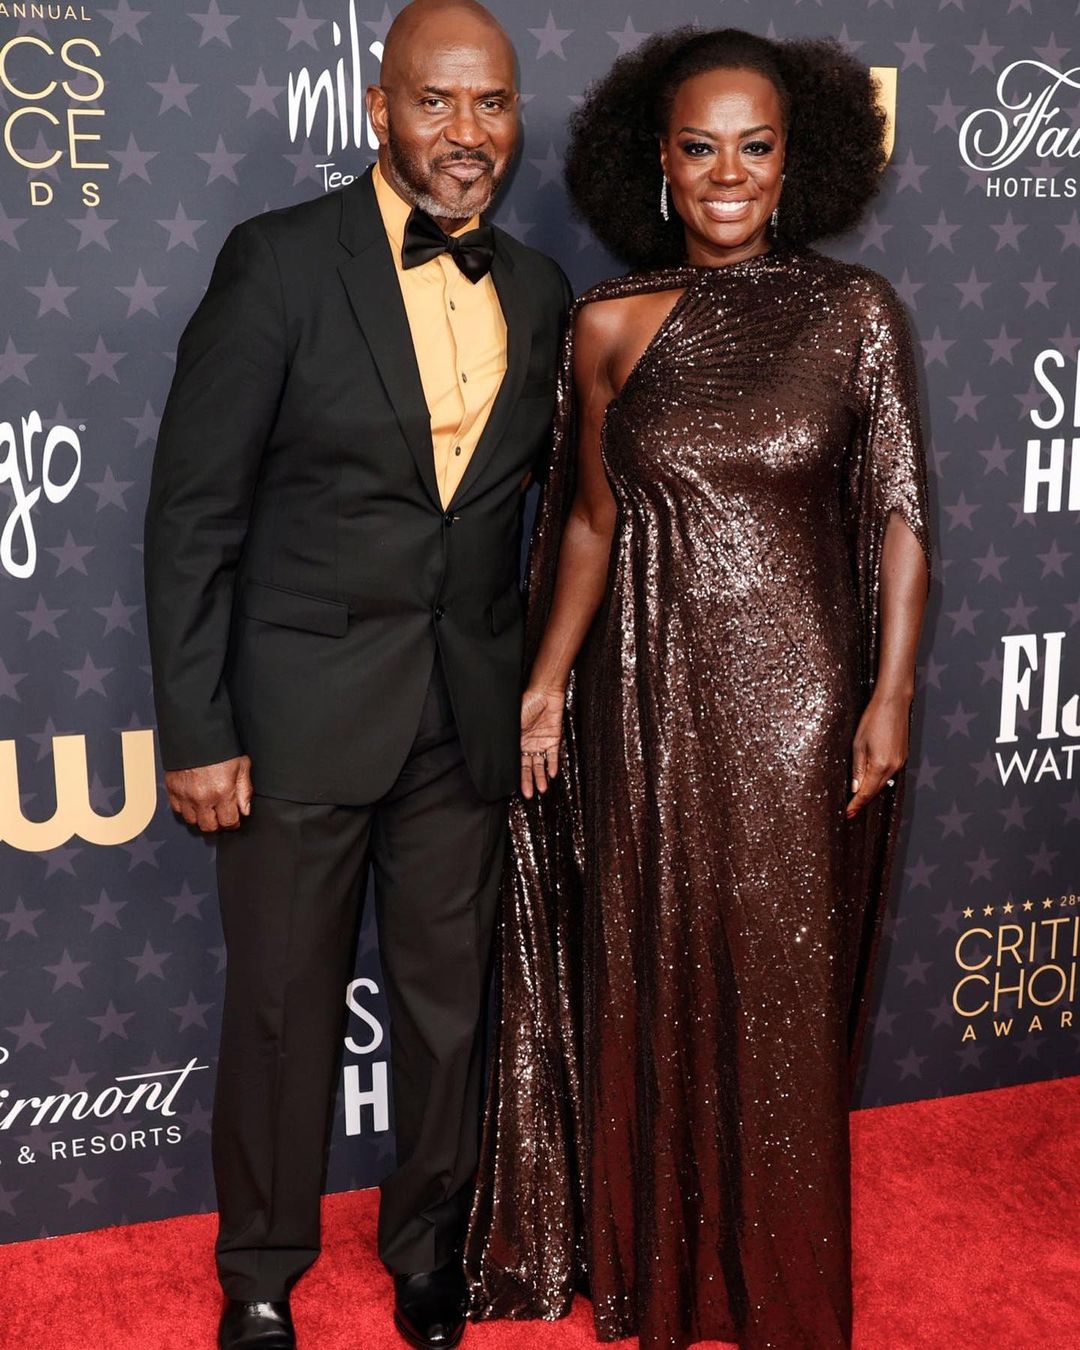 Top 10 Best Dressed at the Critics Choice Awards 2023 Niecy Nash in Jason Wu Sheryl Lee Ralph in Jovana Louis Janelle Monae in Vera Wang and More7